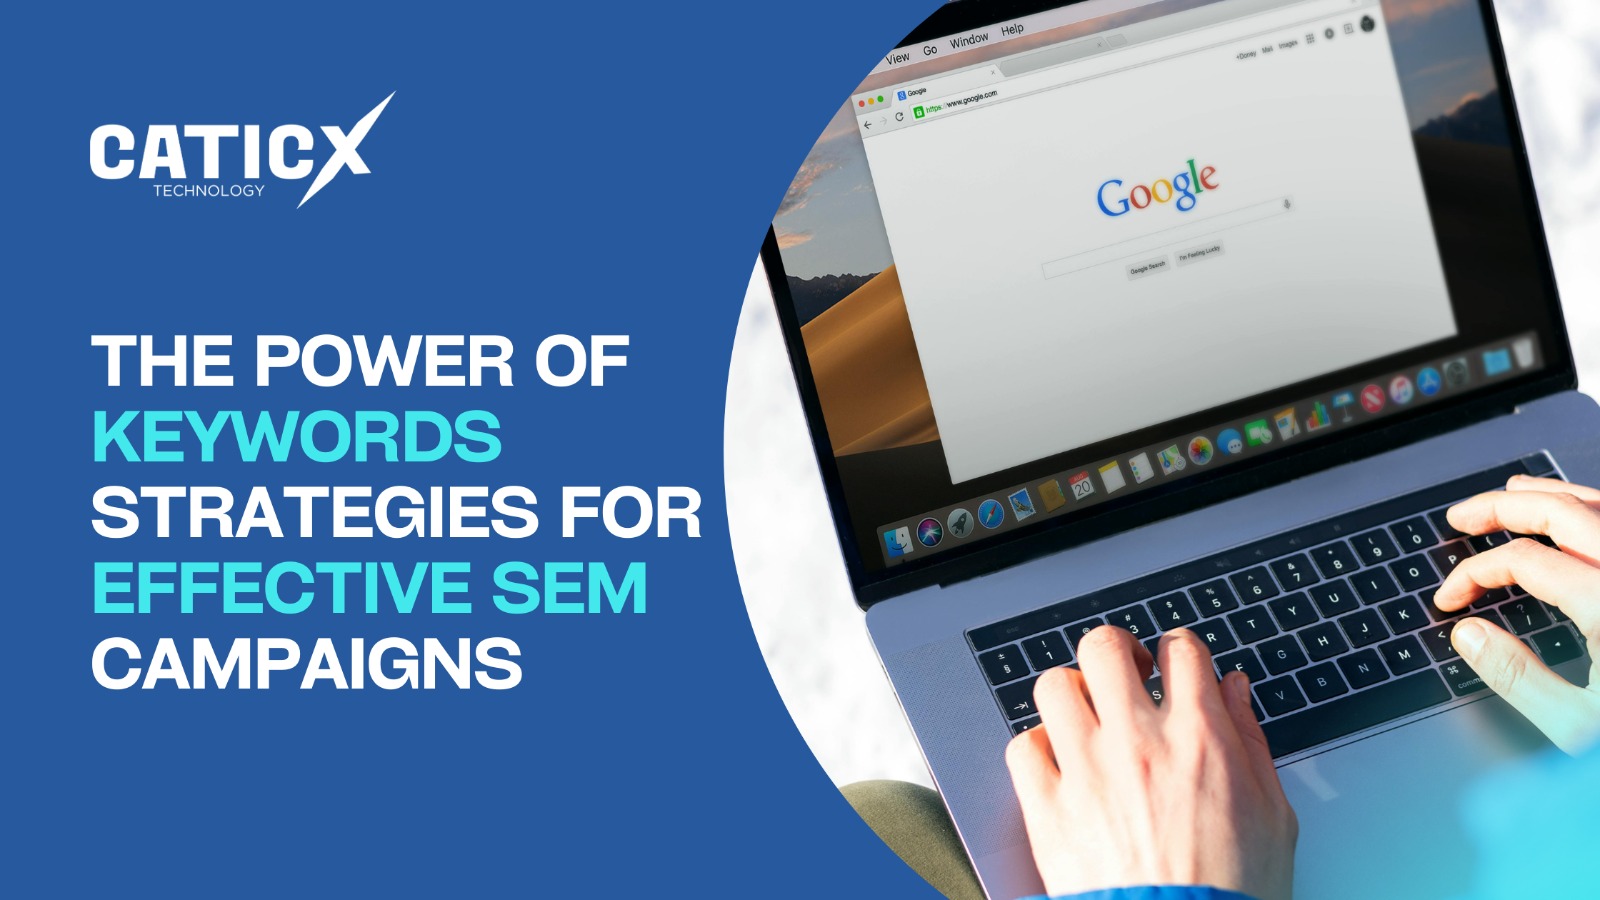 The Power of Keywords: Strategies for Effective SEM Campaigns